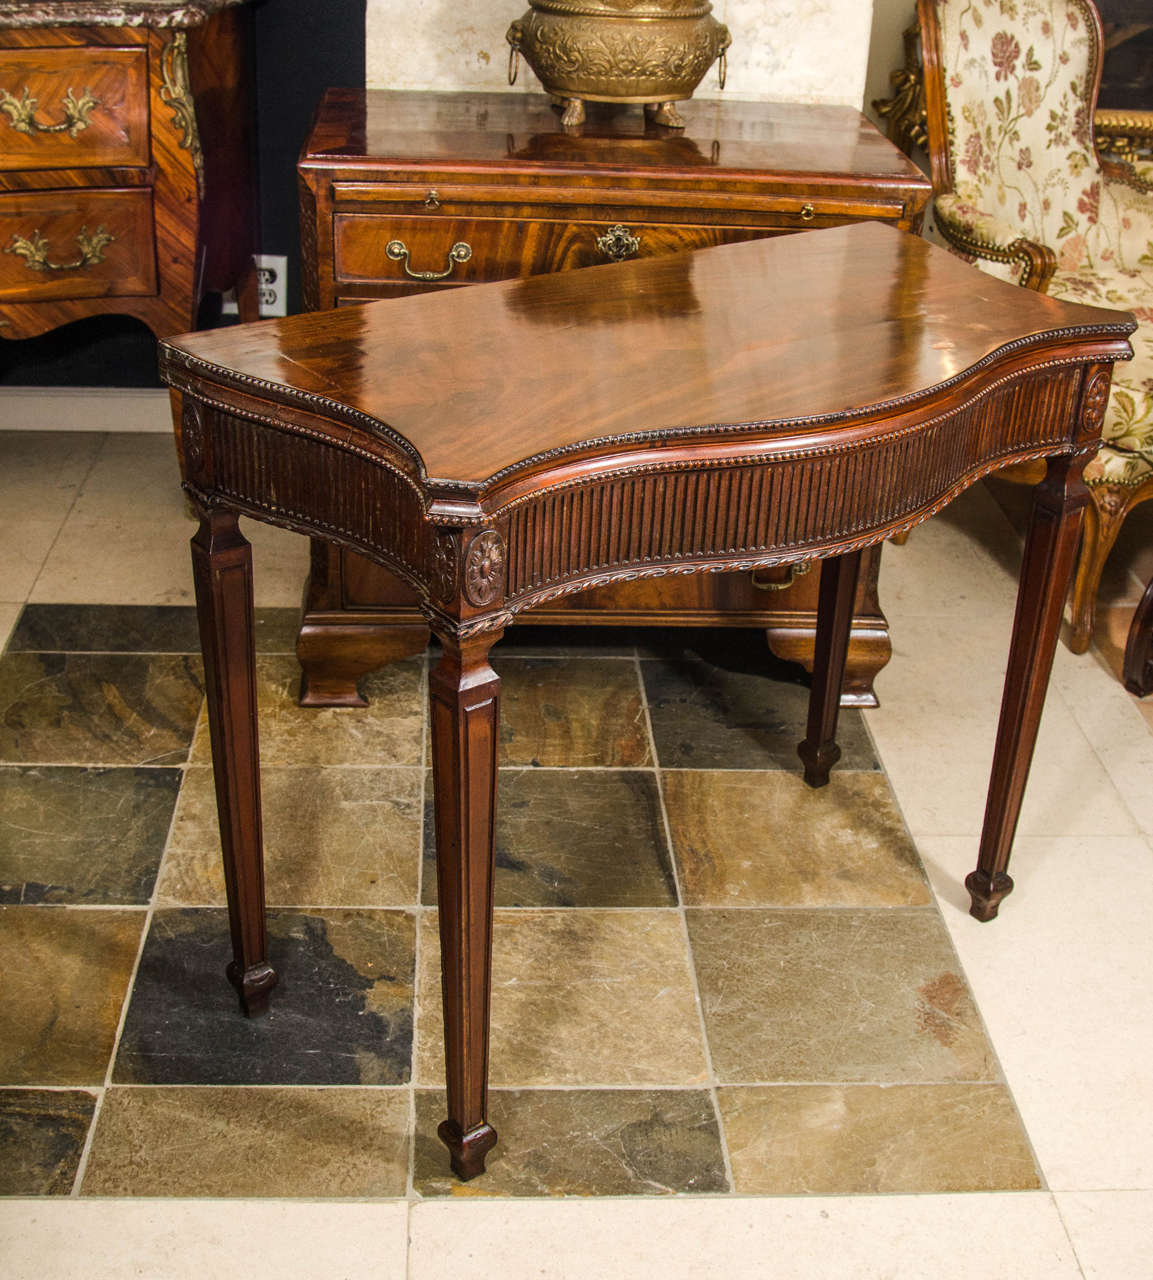 George III mahogany serpentine flip-top card table with fluted frieze and tapering square legs headed by paterae, with a traditional green baize lined interior.